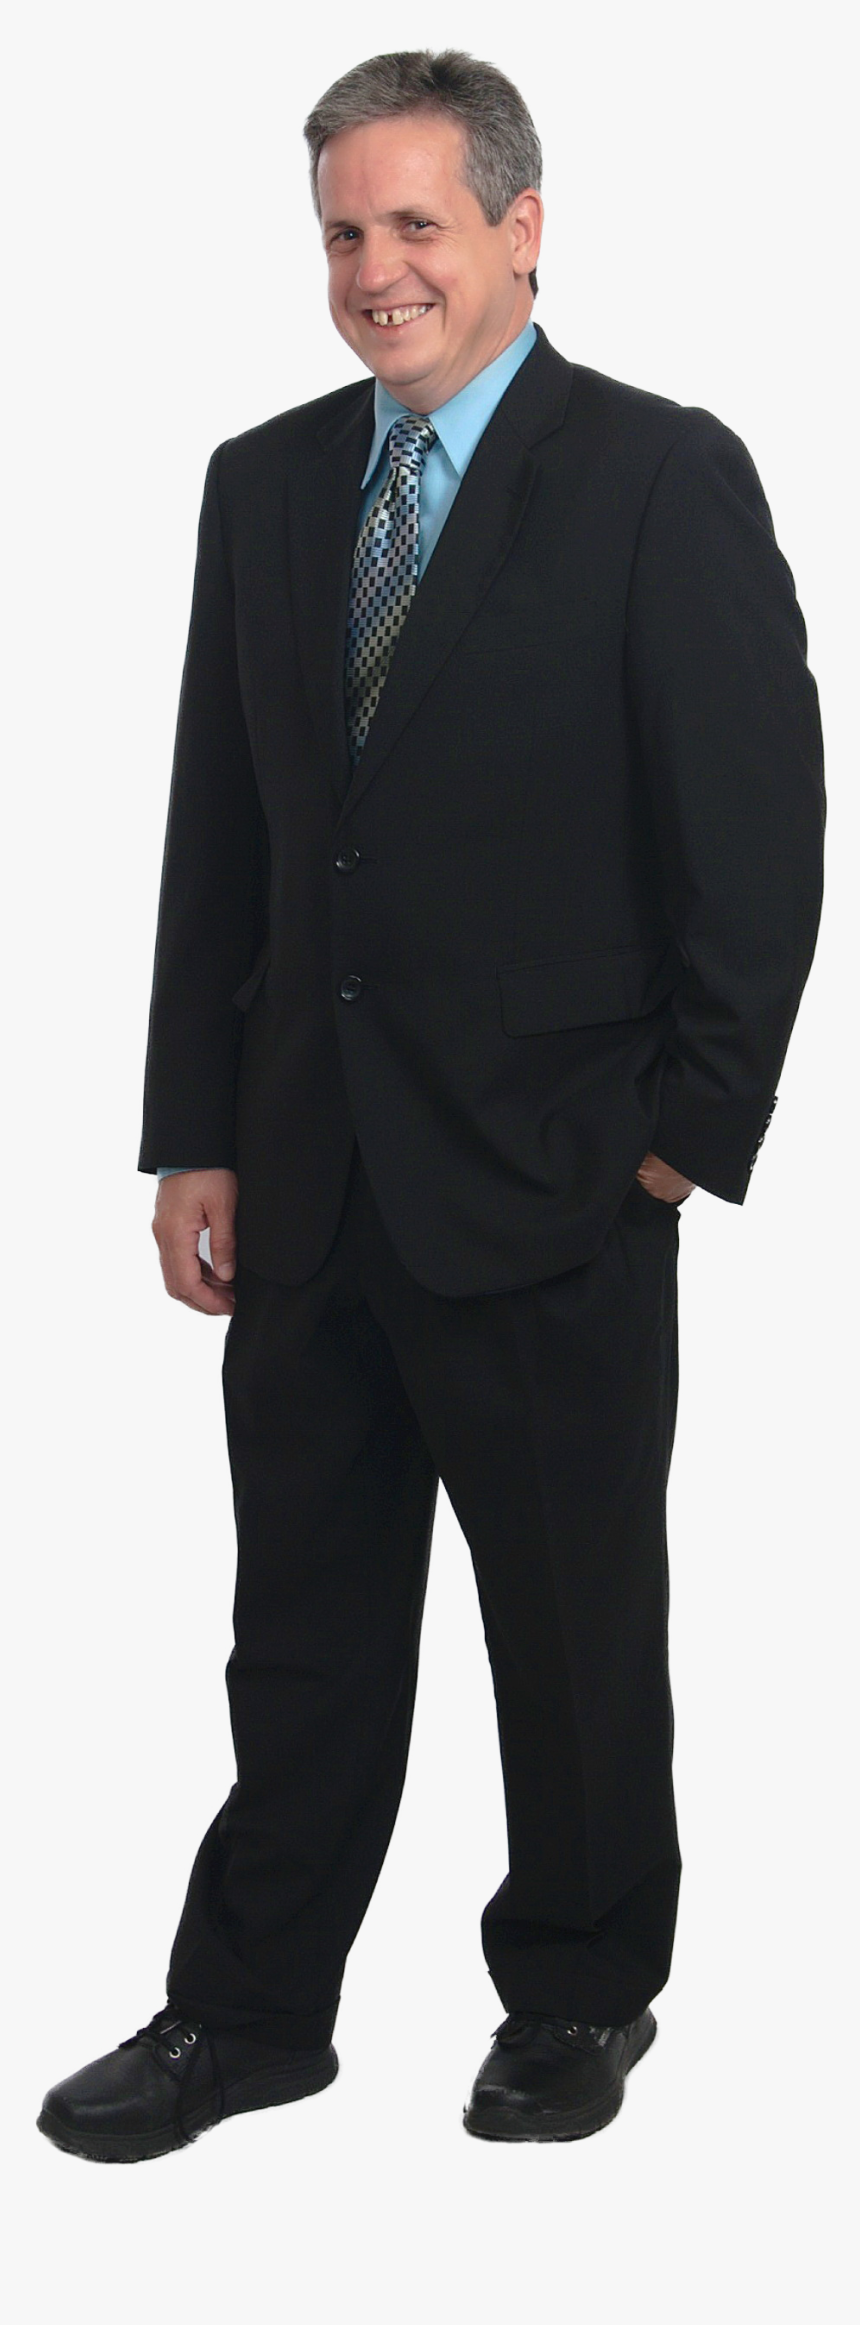 Mark Manning - Tuxedo, HD Png Download, Free Download